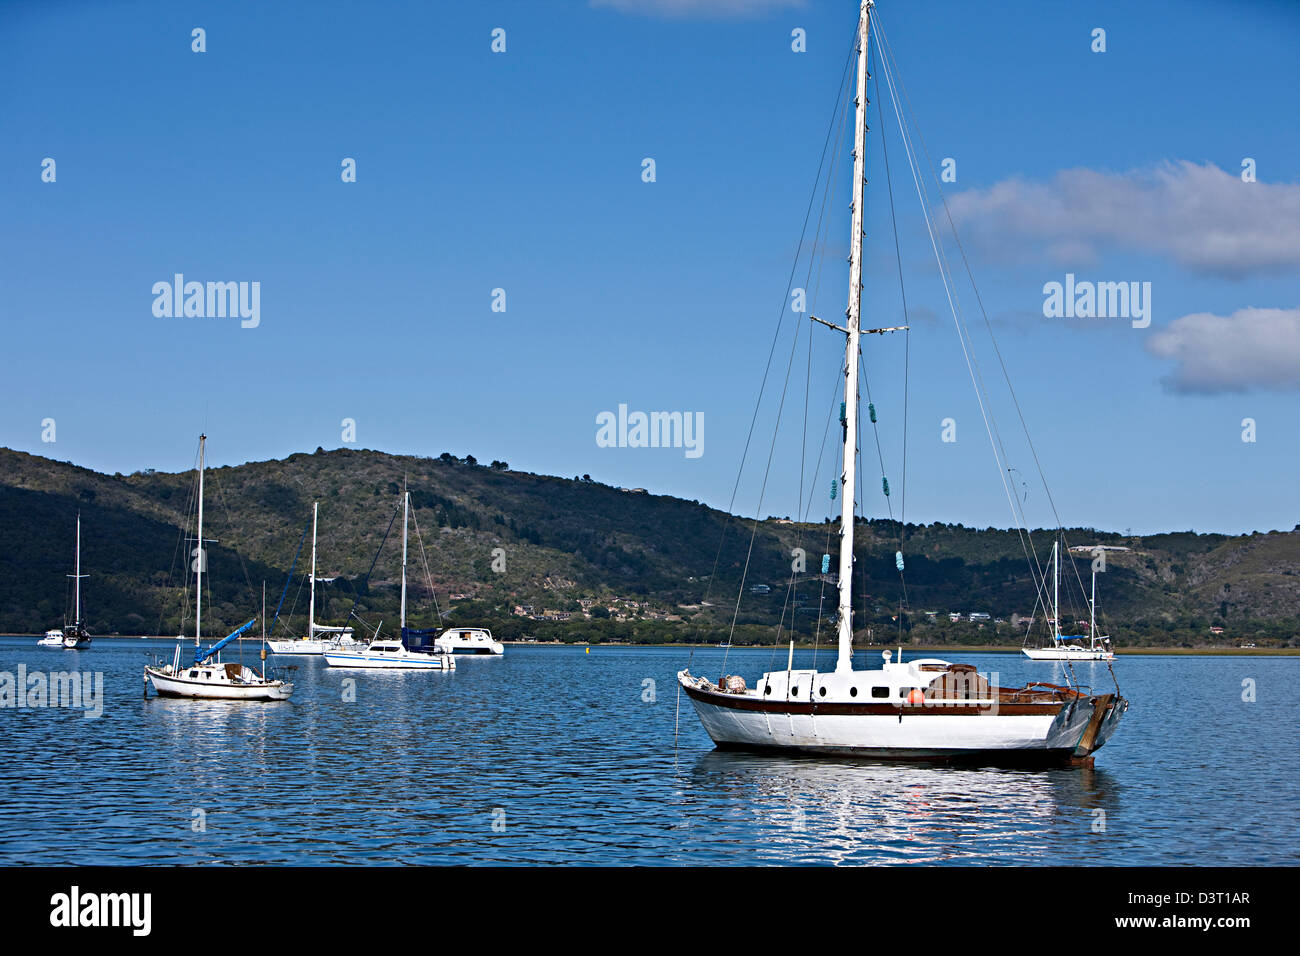 Sailing yachts in Featherbed Nature Reserve, Knysna, South Africa Stock Photo